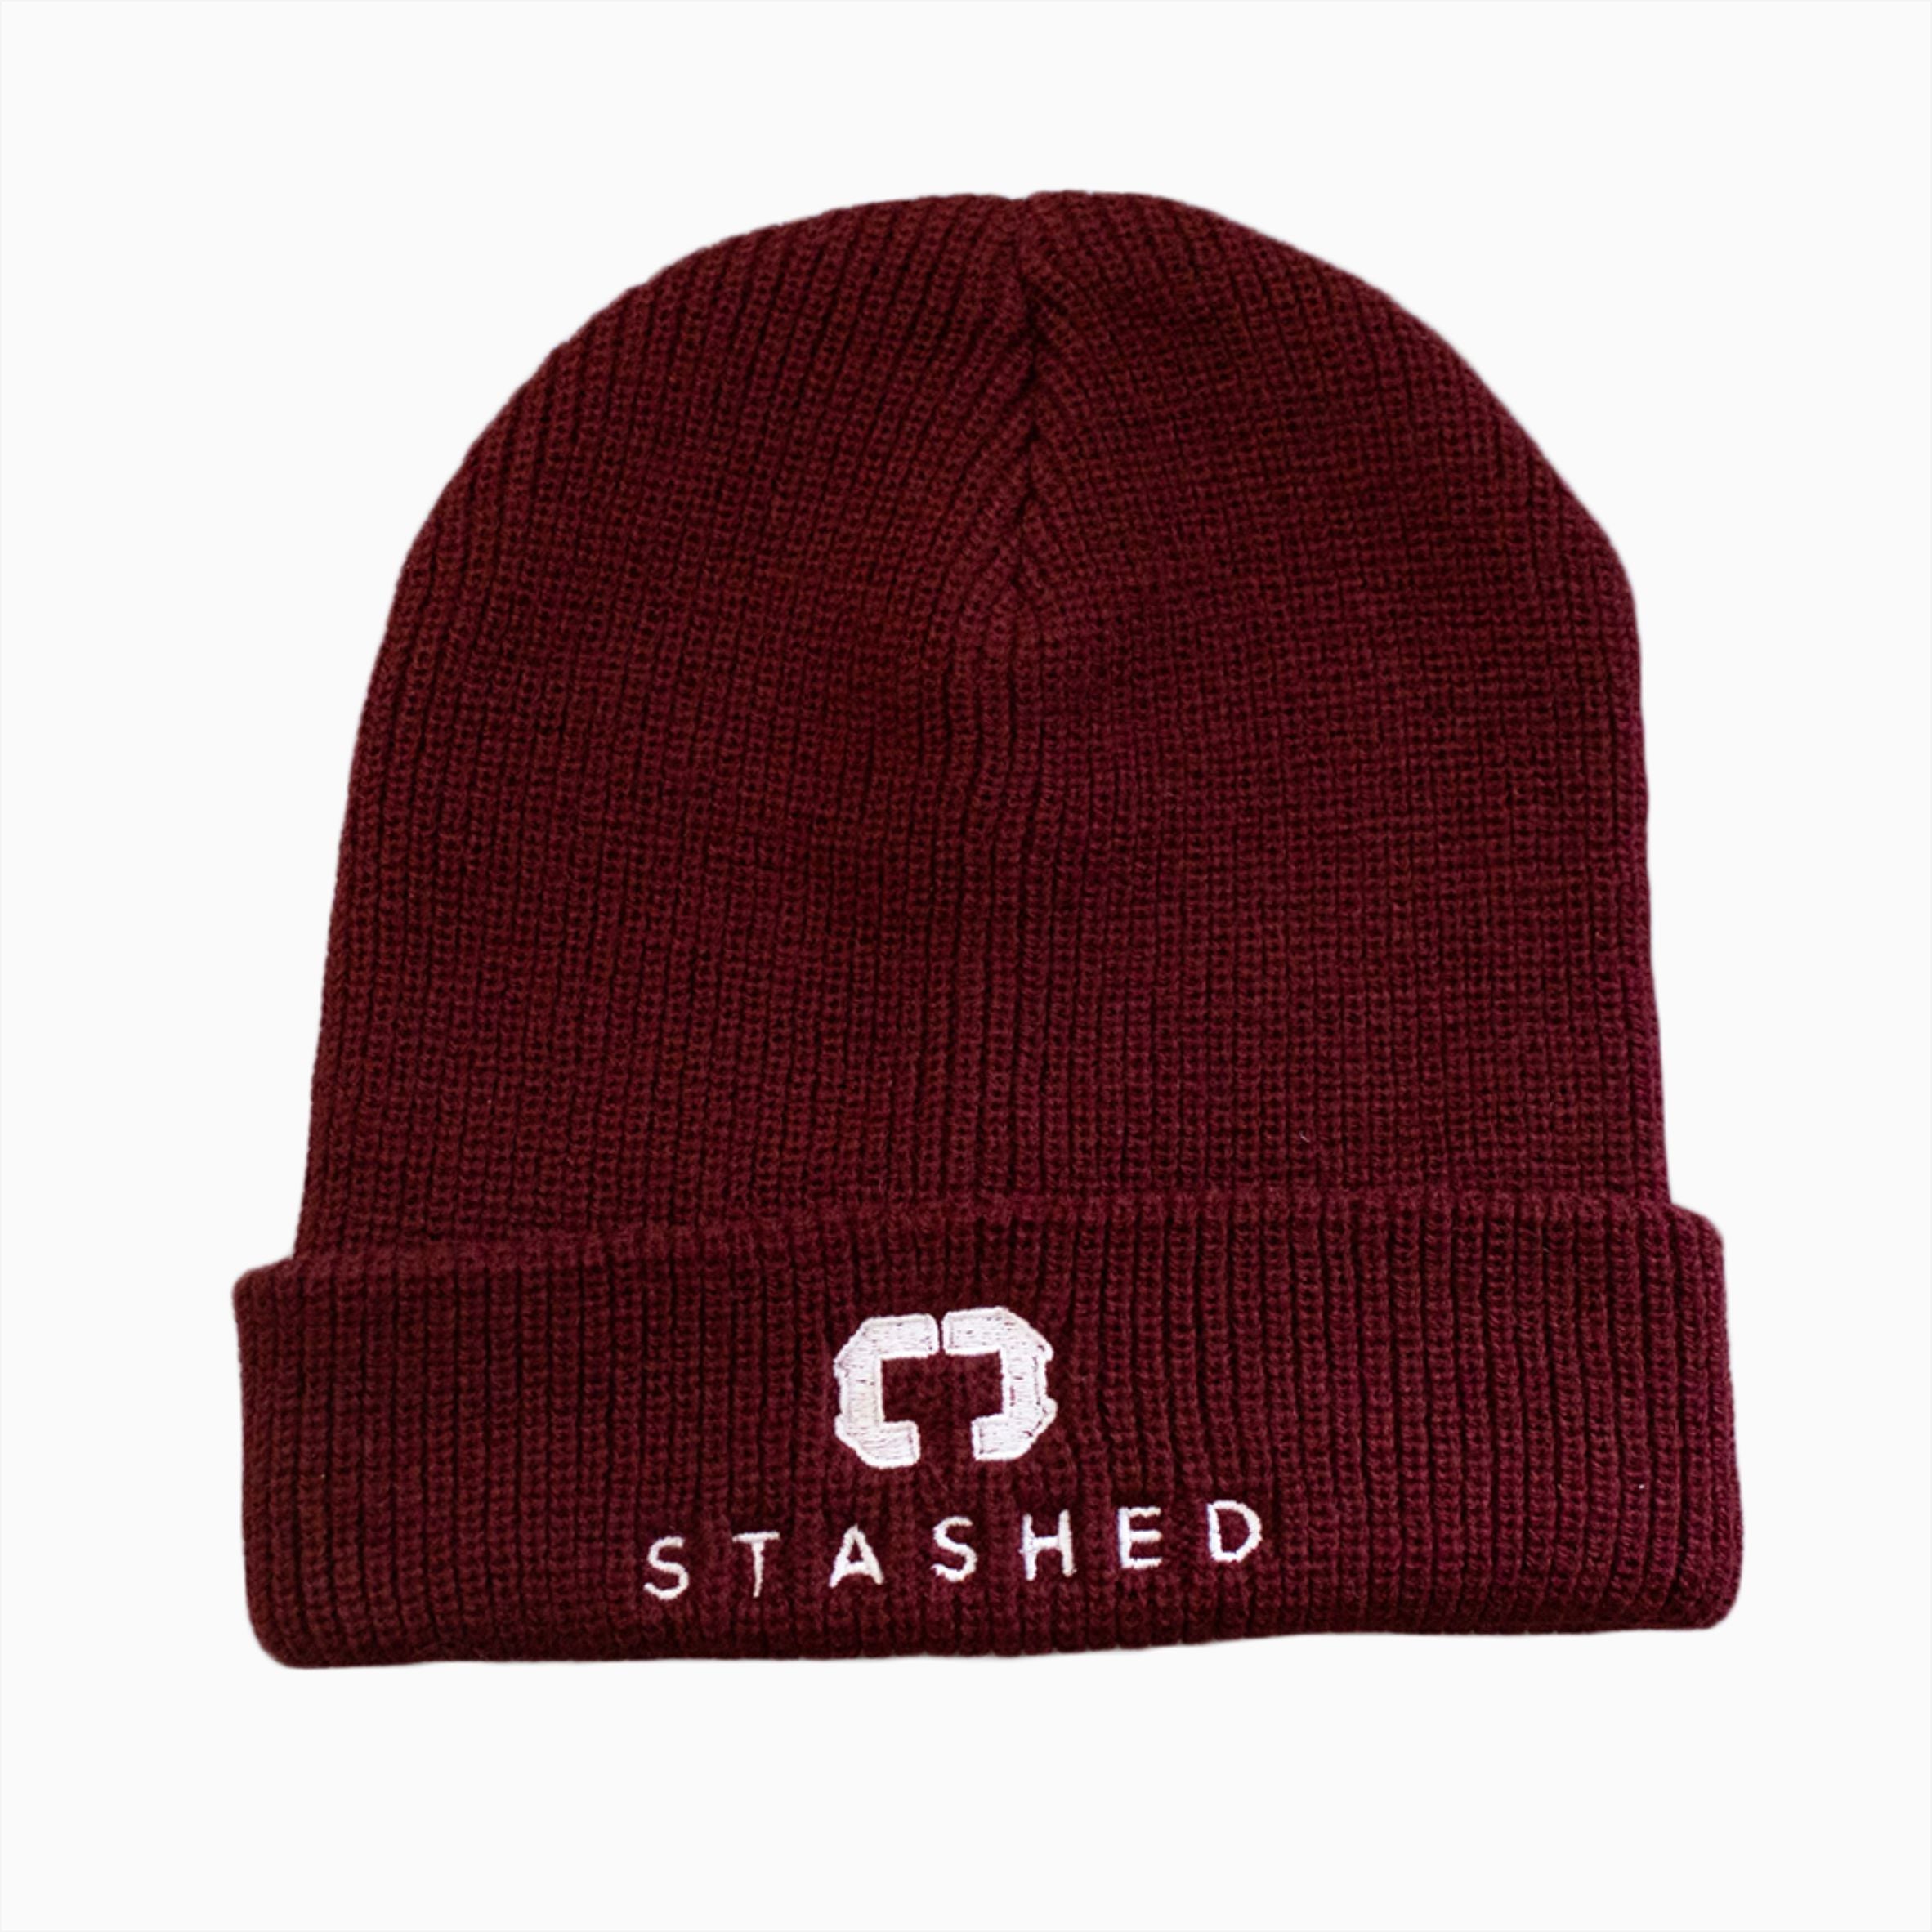 Stashed Products Beanie Hat - Burgundy